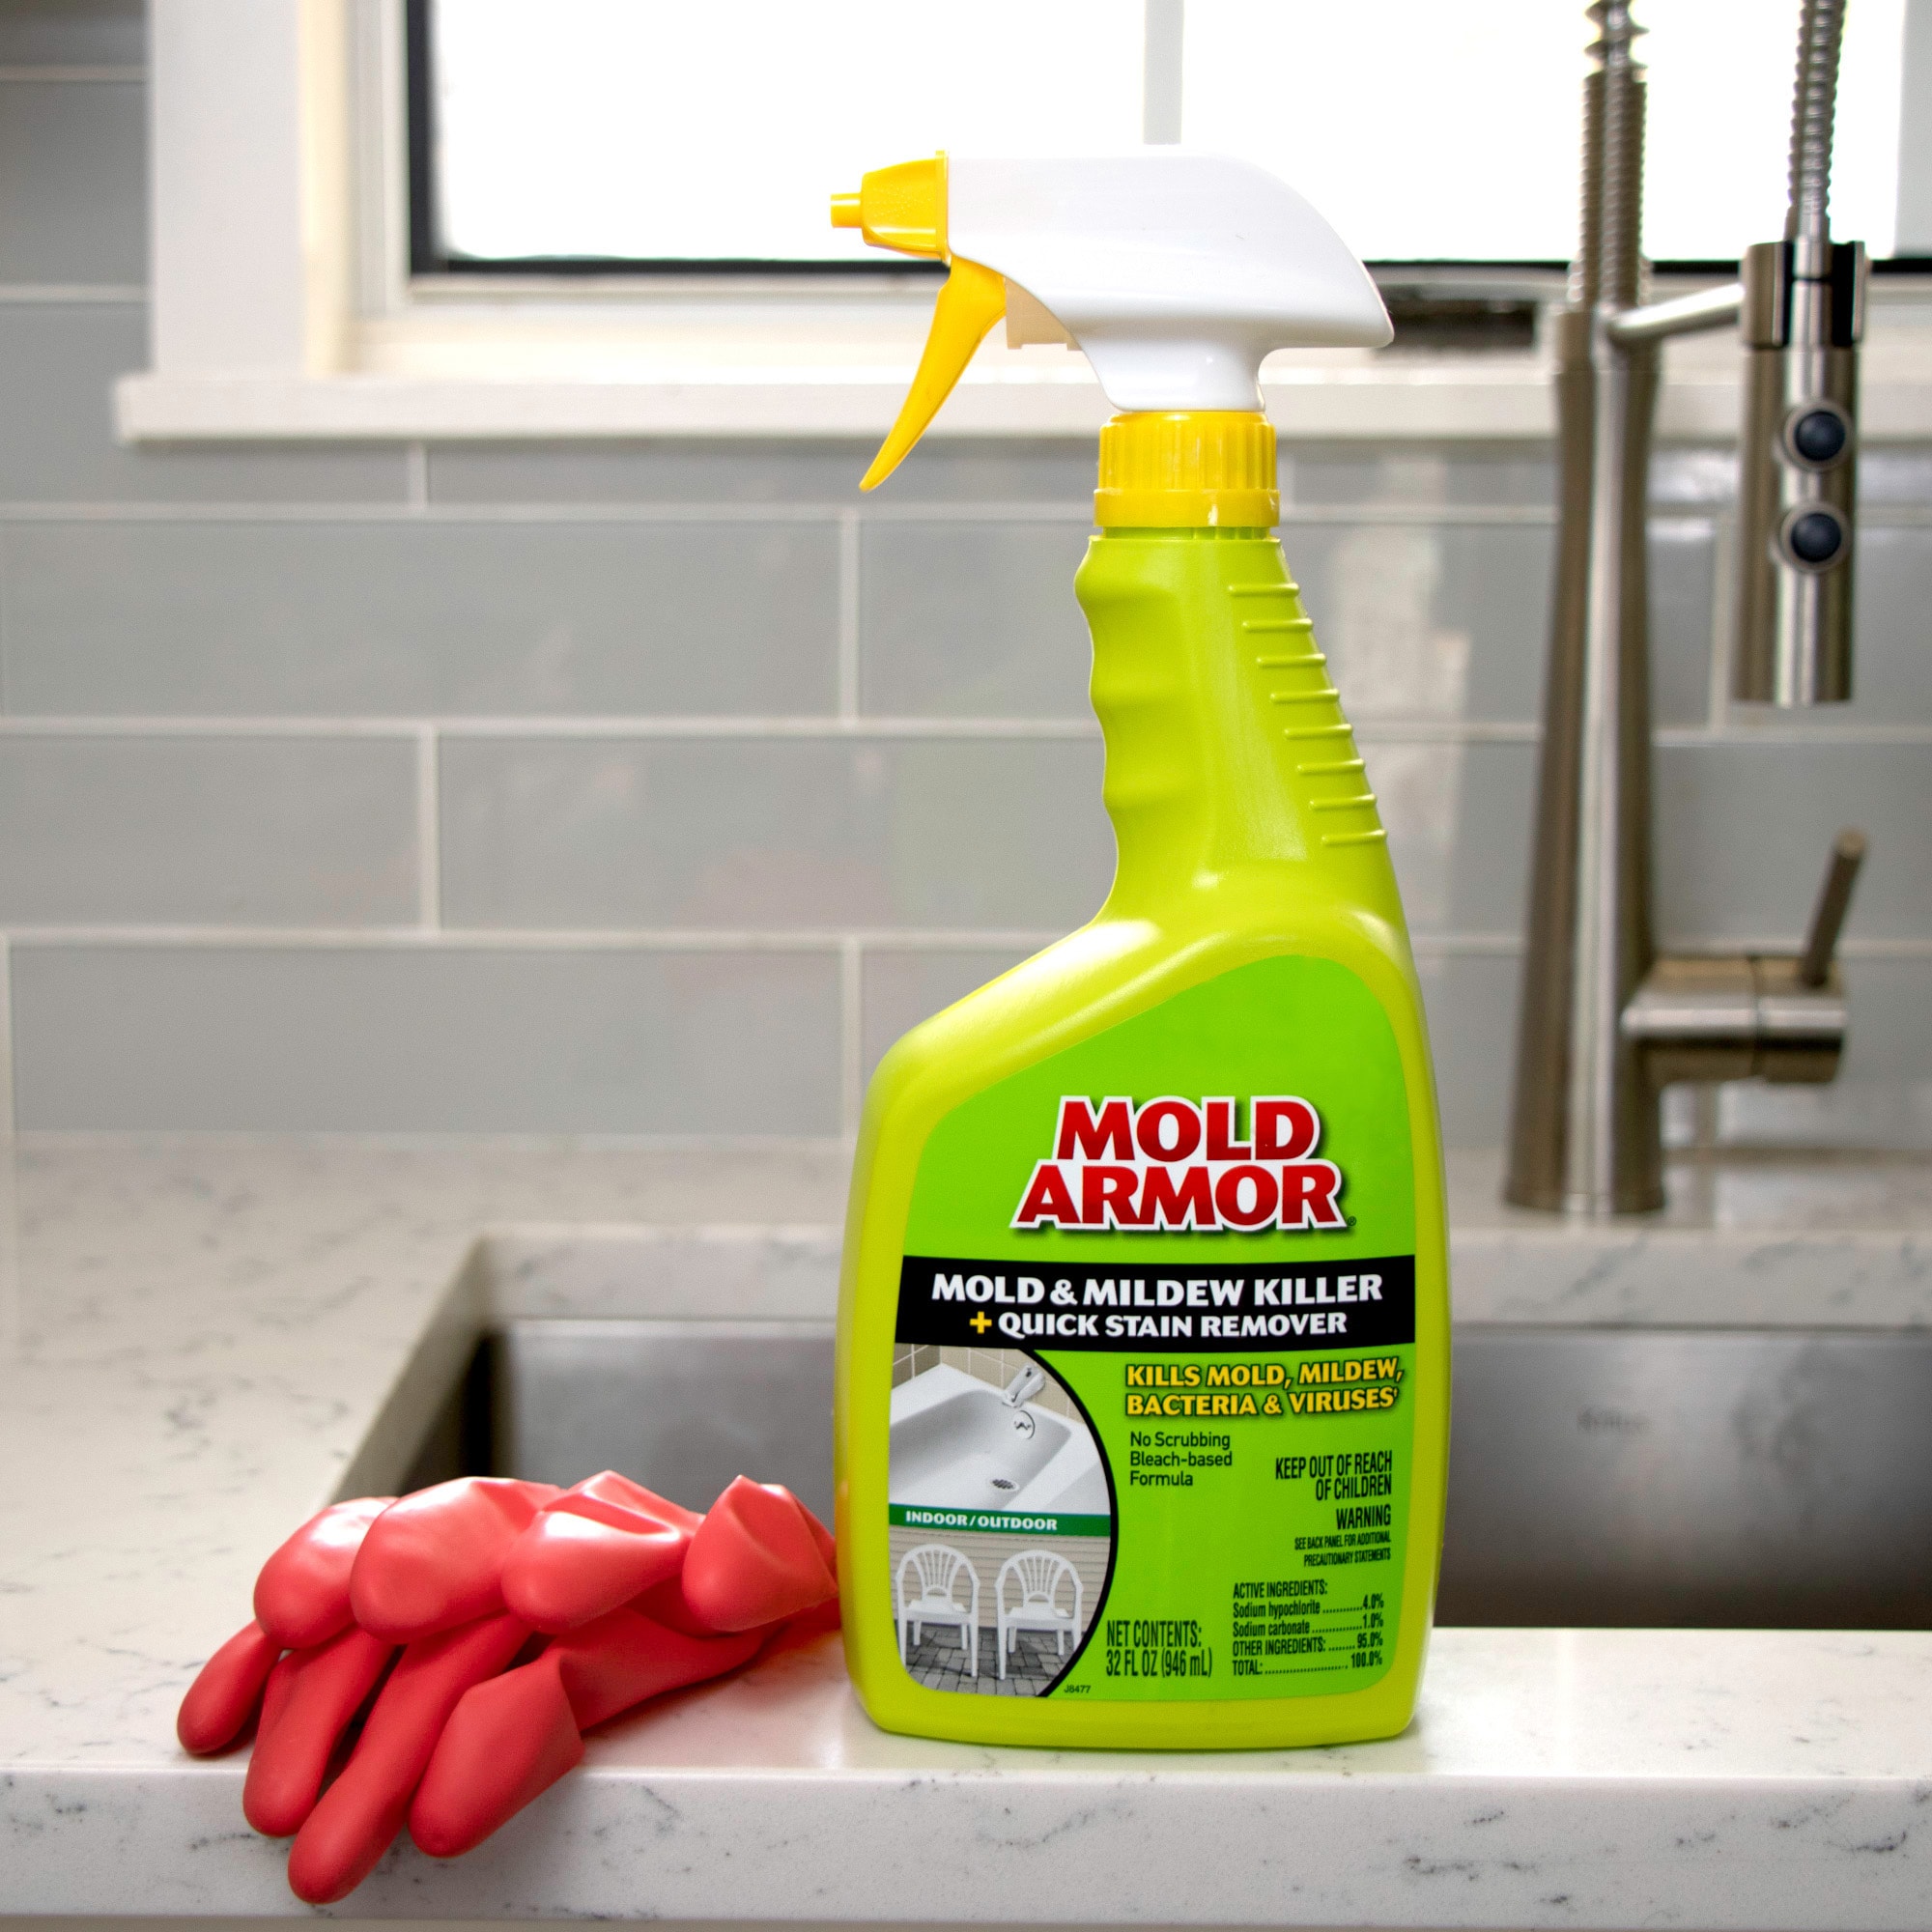 Concrobium Mold Control - Mold and Mildew Remover- Household 32 oz